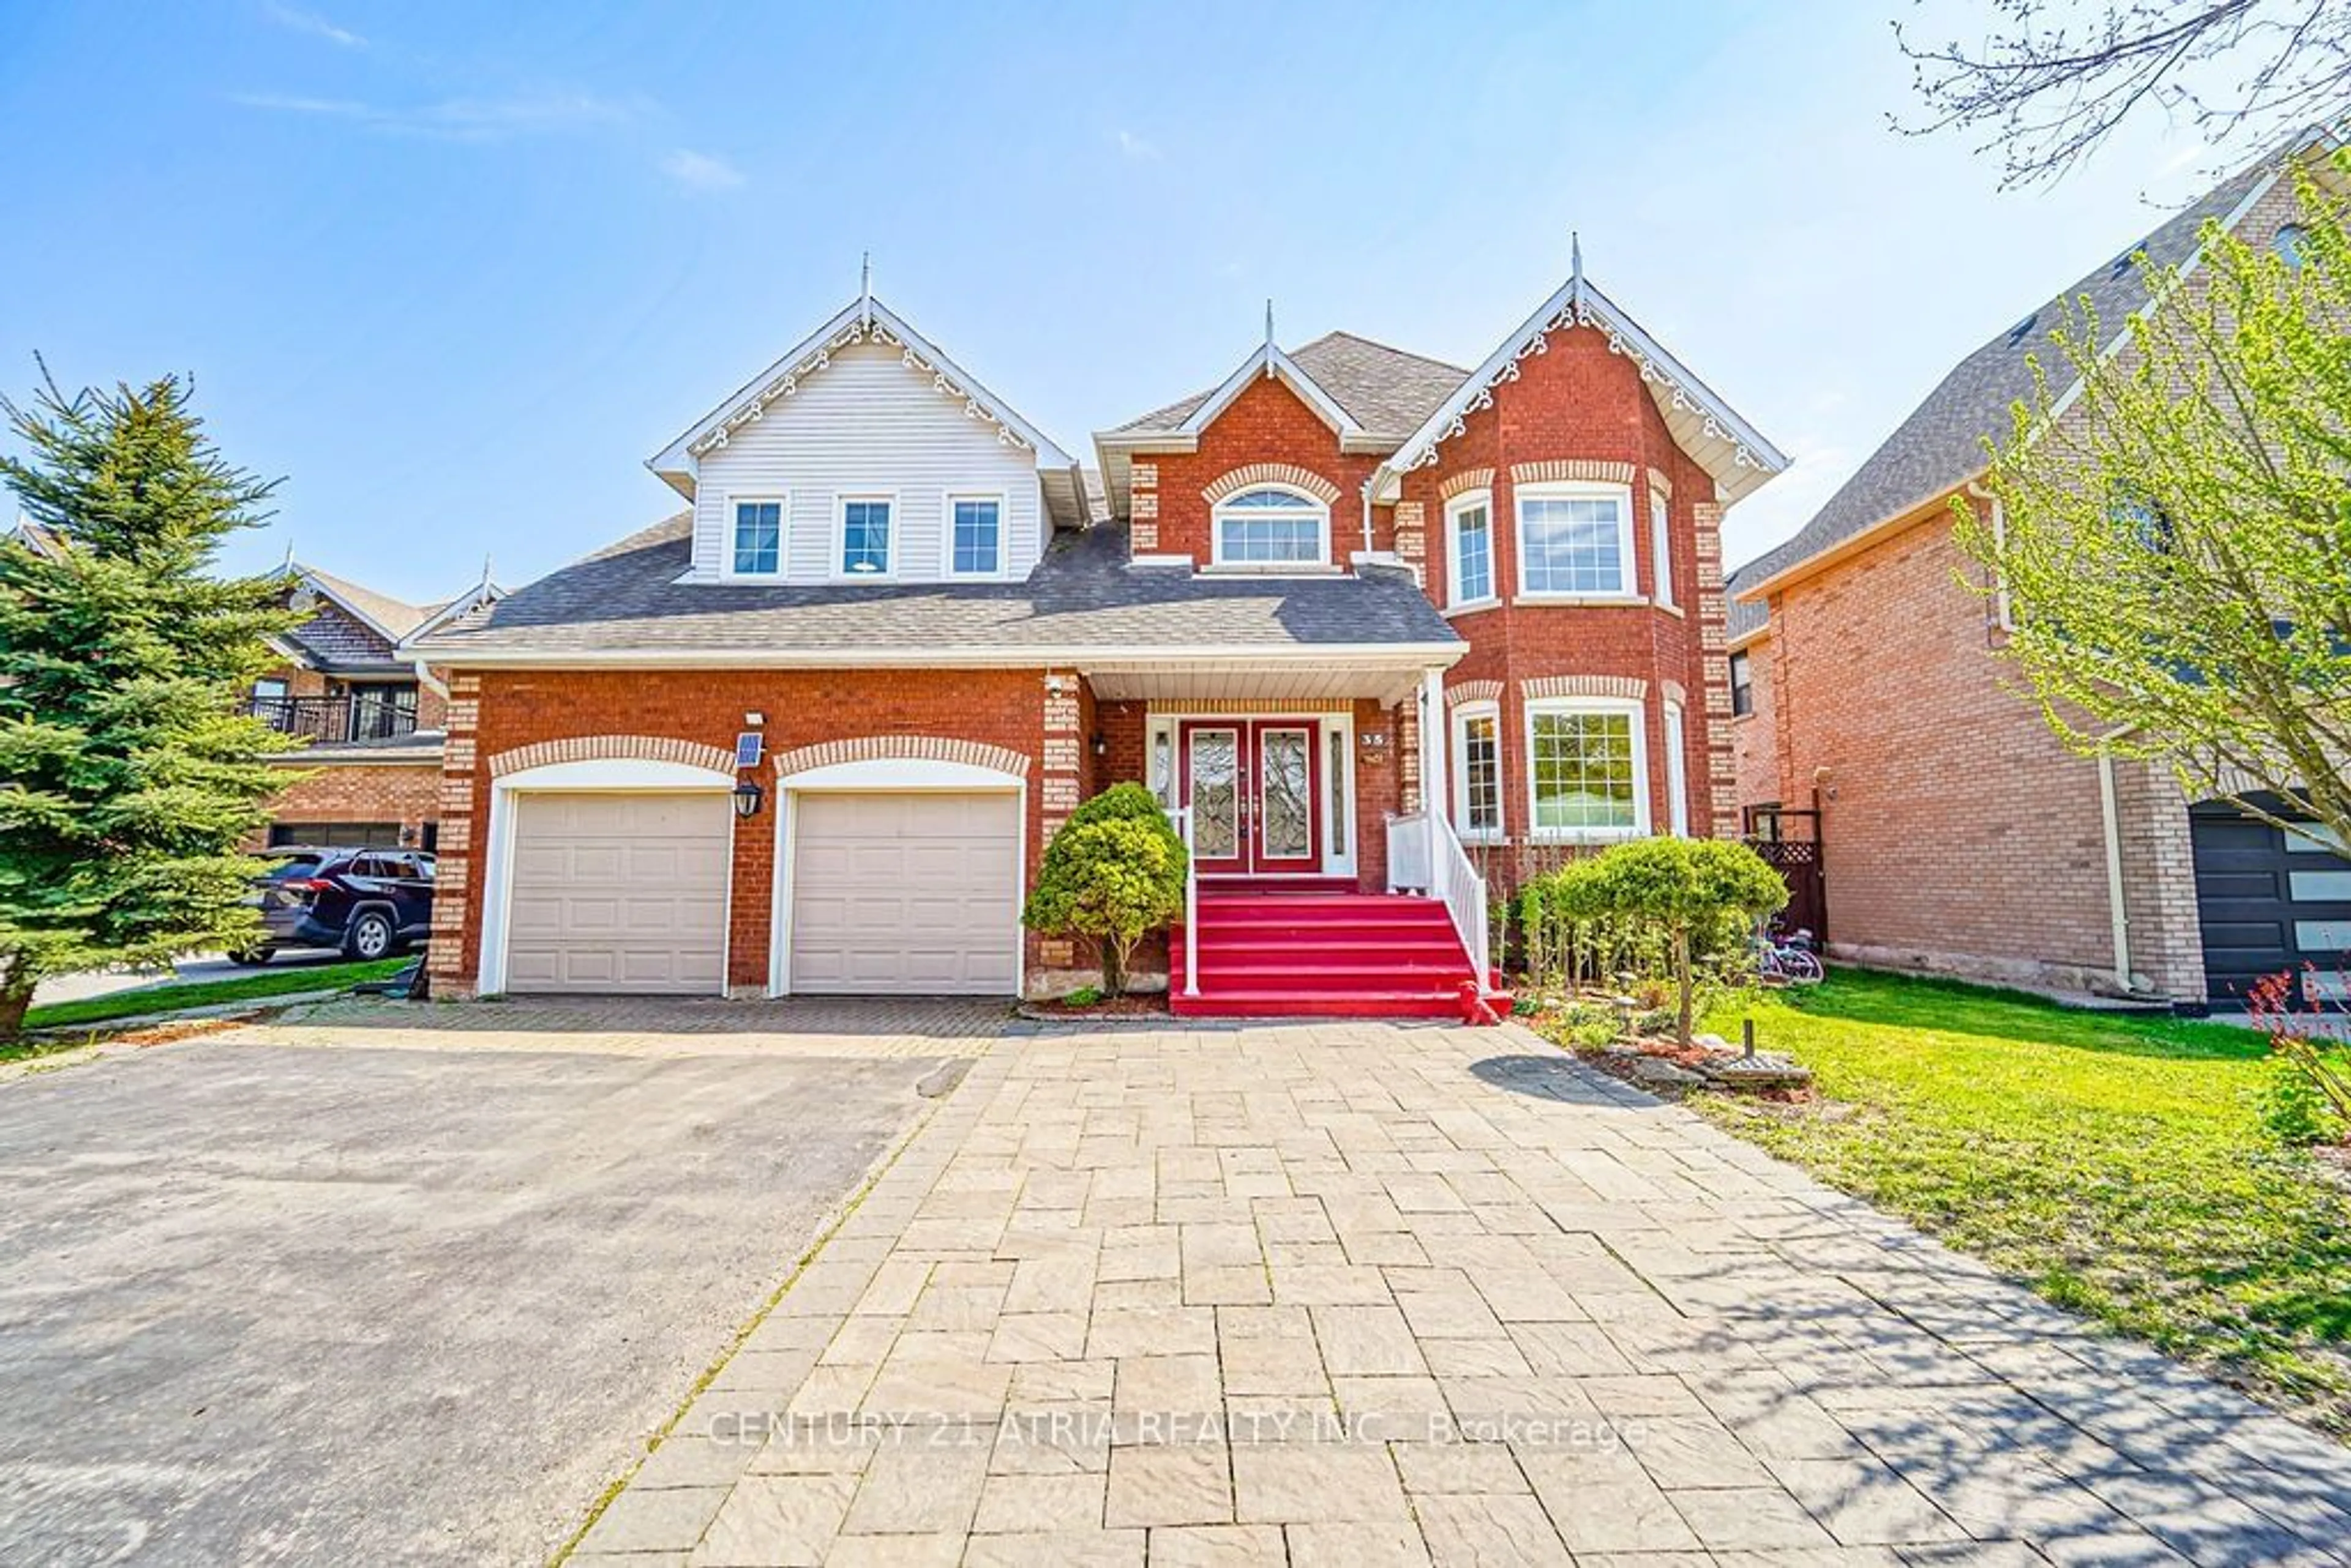 Home with brick exterior material for 35 Grovepark St, Richmond Hill Ontario L4E 3L5